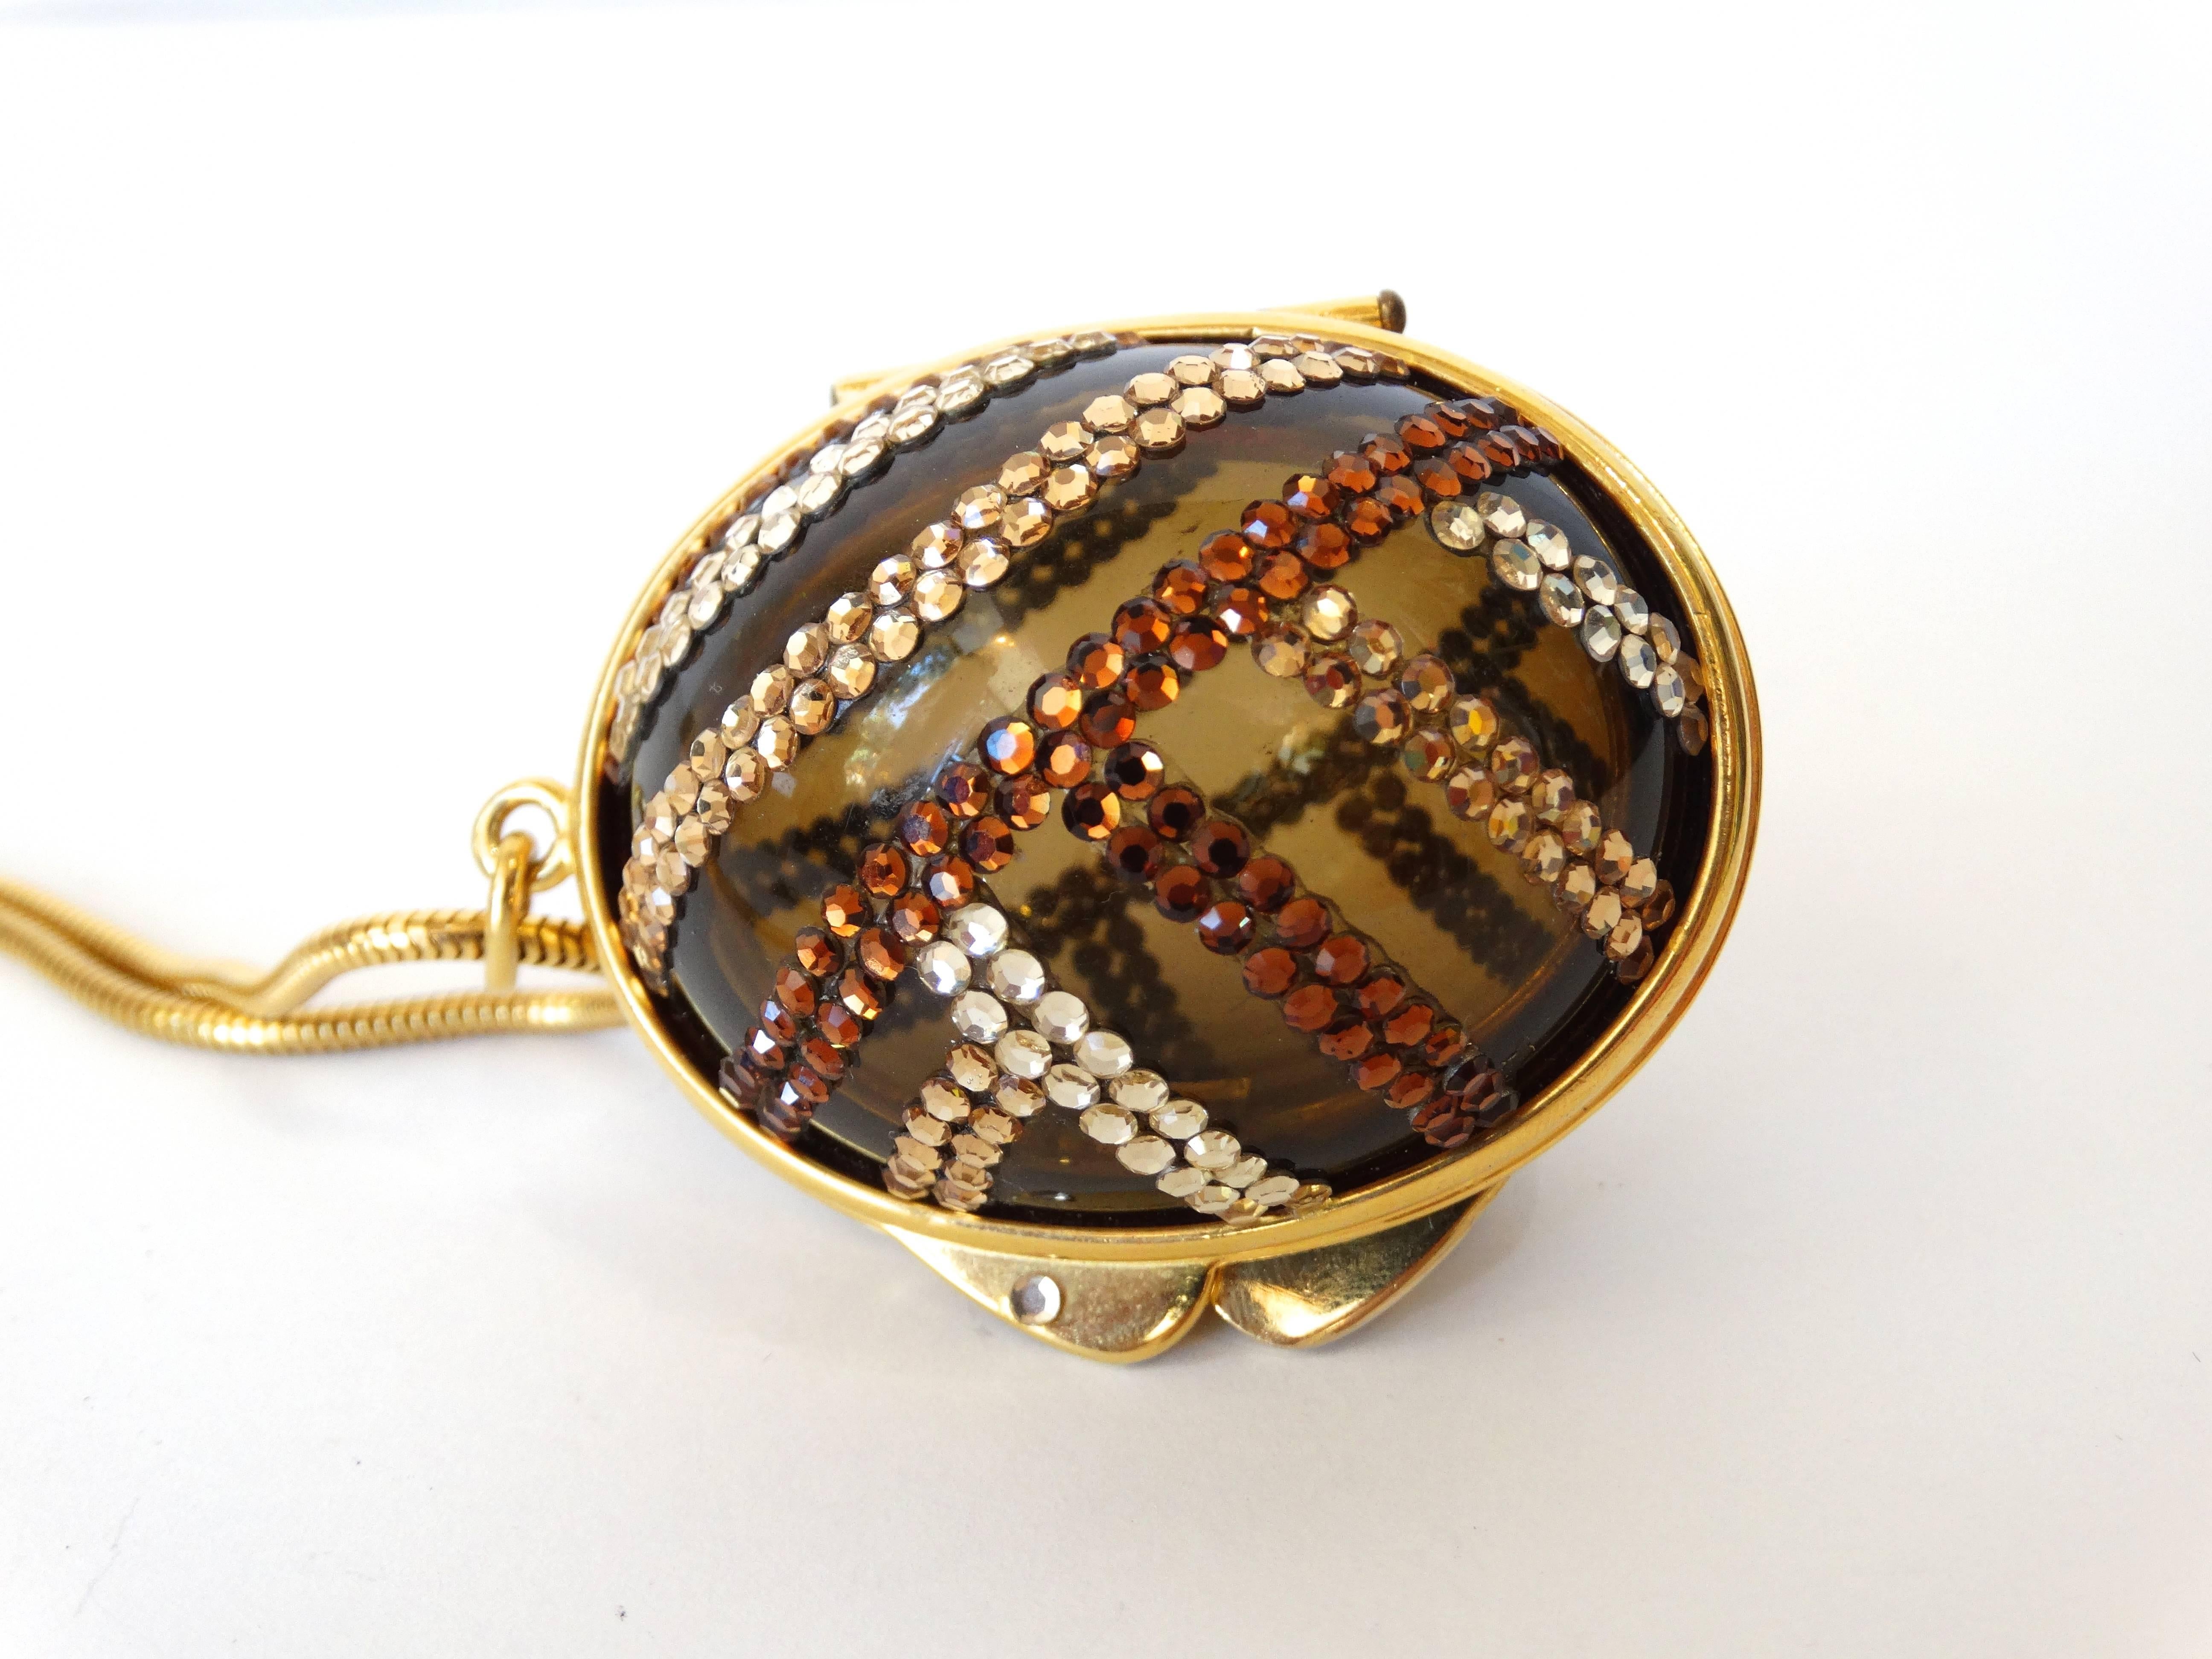 The incredible 1980s Judith Leiber egg locket! This piece is hard to come by- by the prolific jewelry and handbag designer Judith Leiber! Super unique egg shaped locket made of a clear brown lucite and accented with tan and brown crystals. Gold